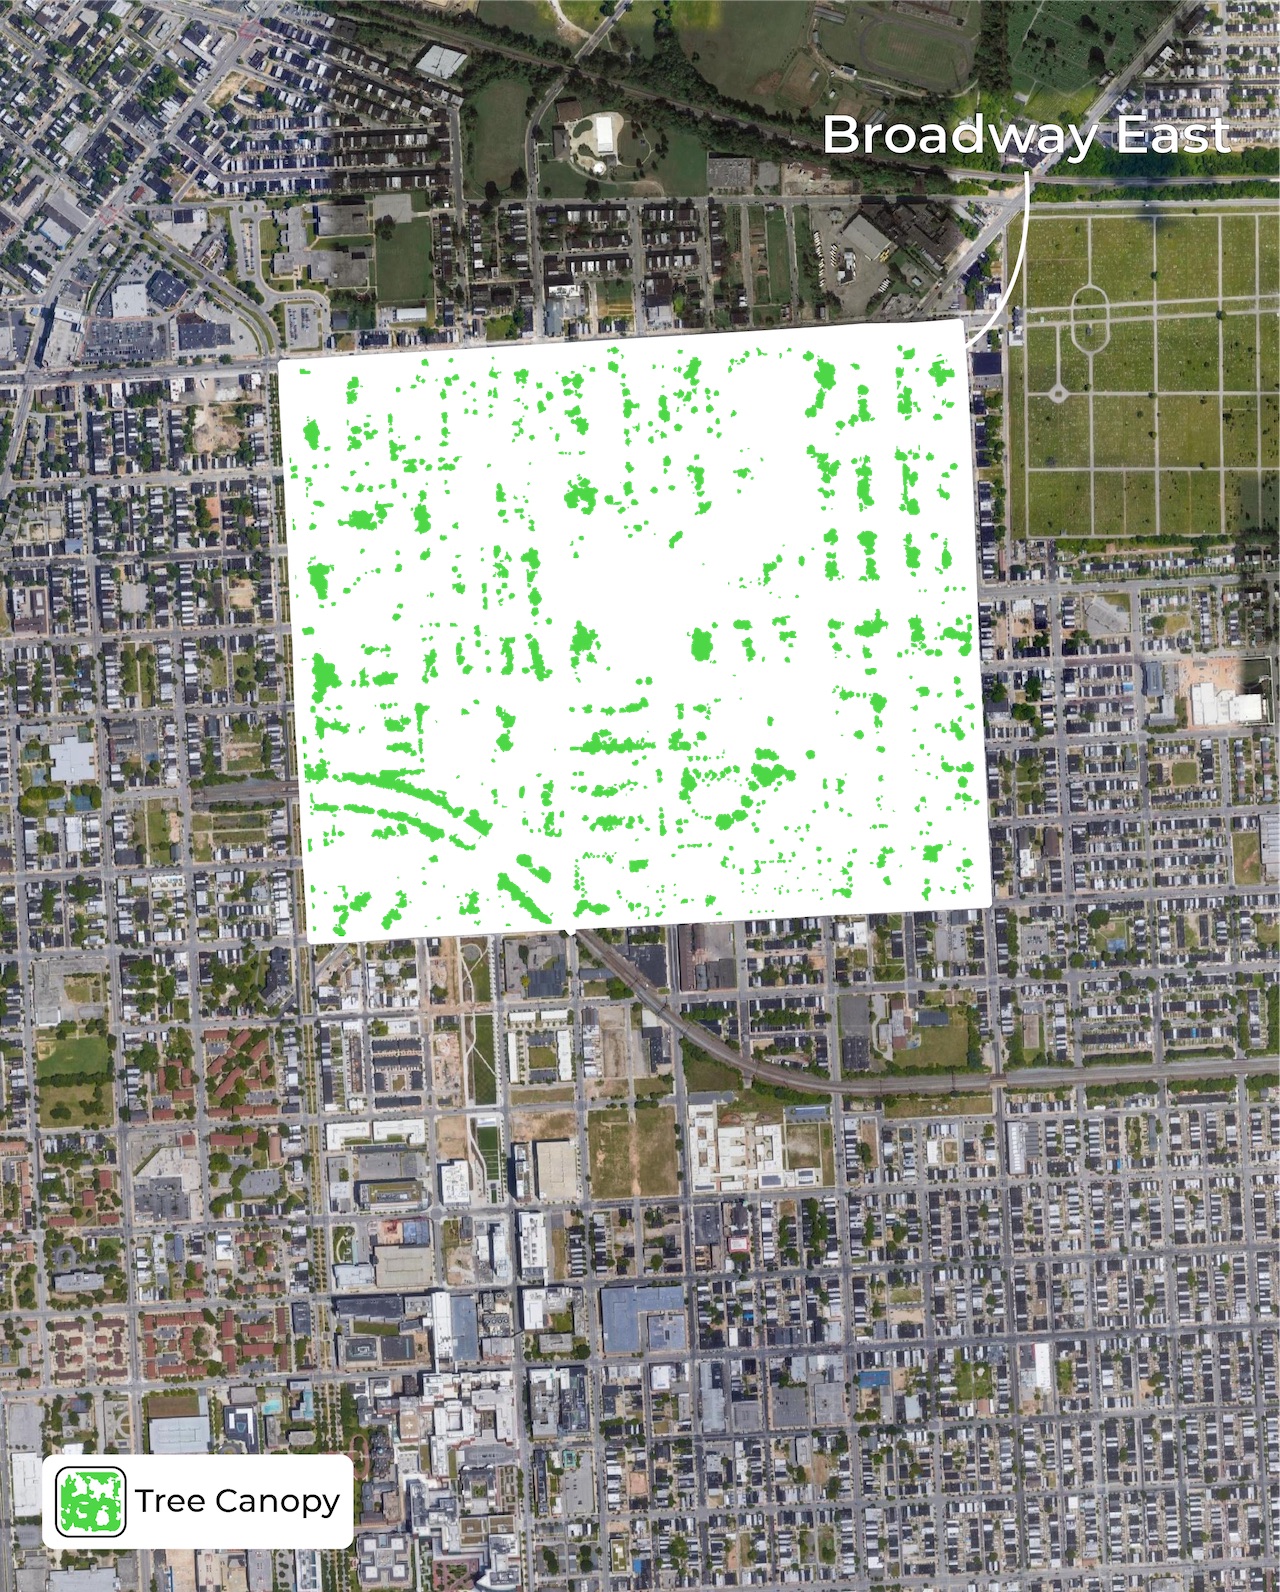 The satellite image is replaced by the few green blotches that represent the trees in this neighborhood.